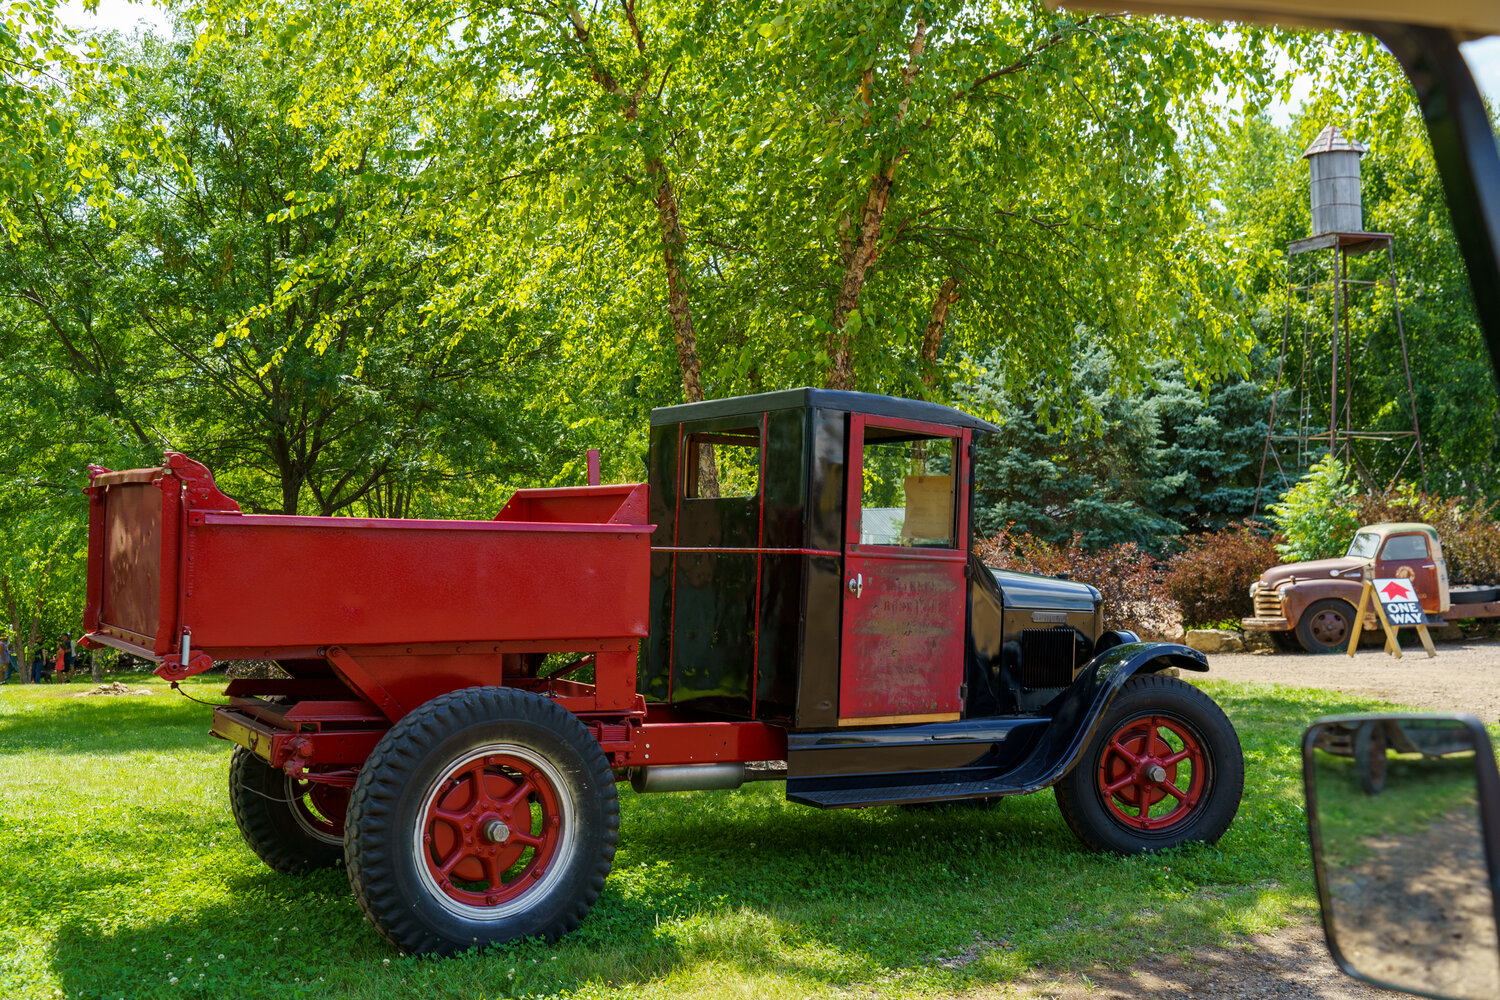 This old truck was an early 1900’s model beautifully restored and drivable today. It was on display near the gravel pit display.